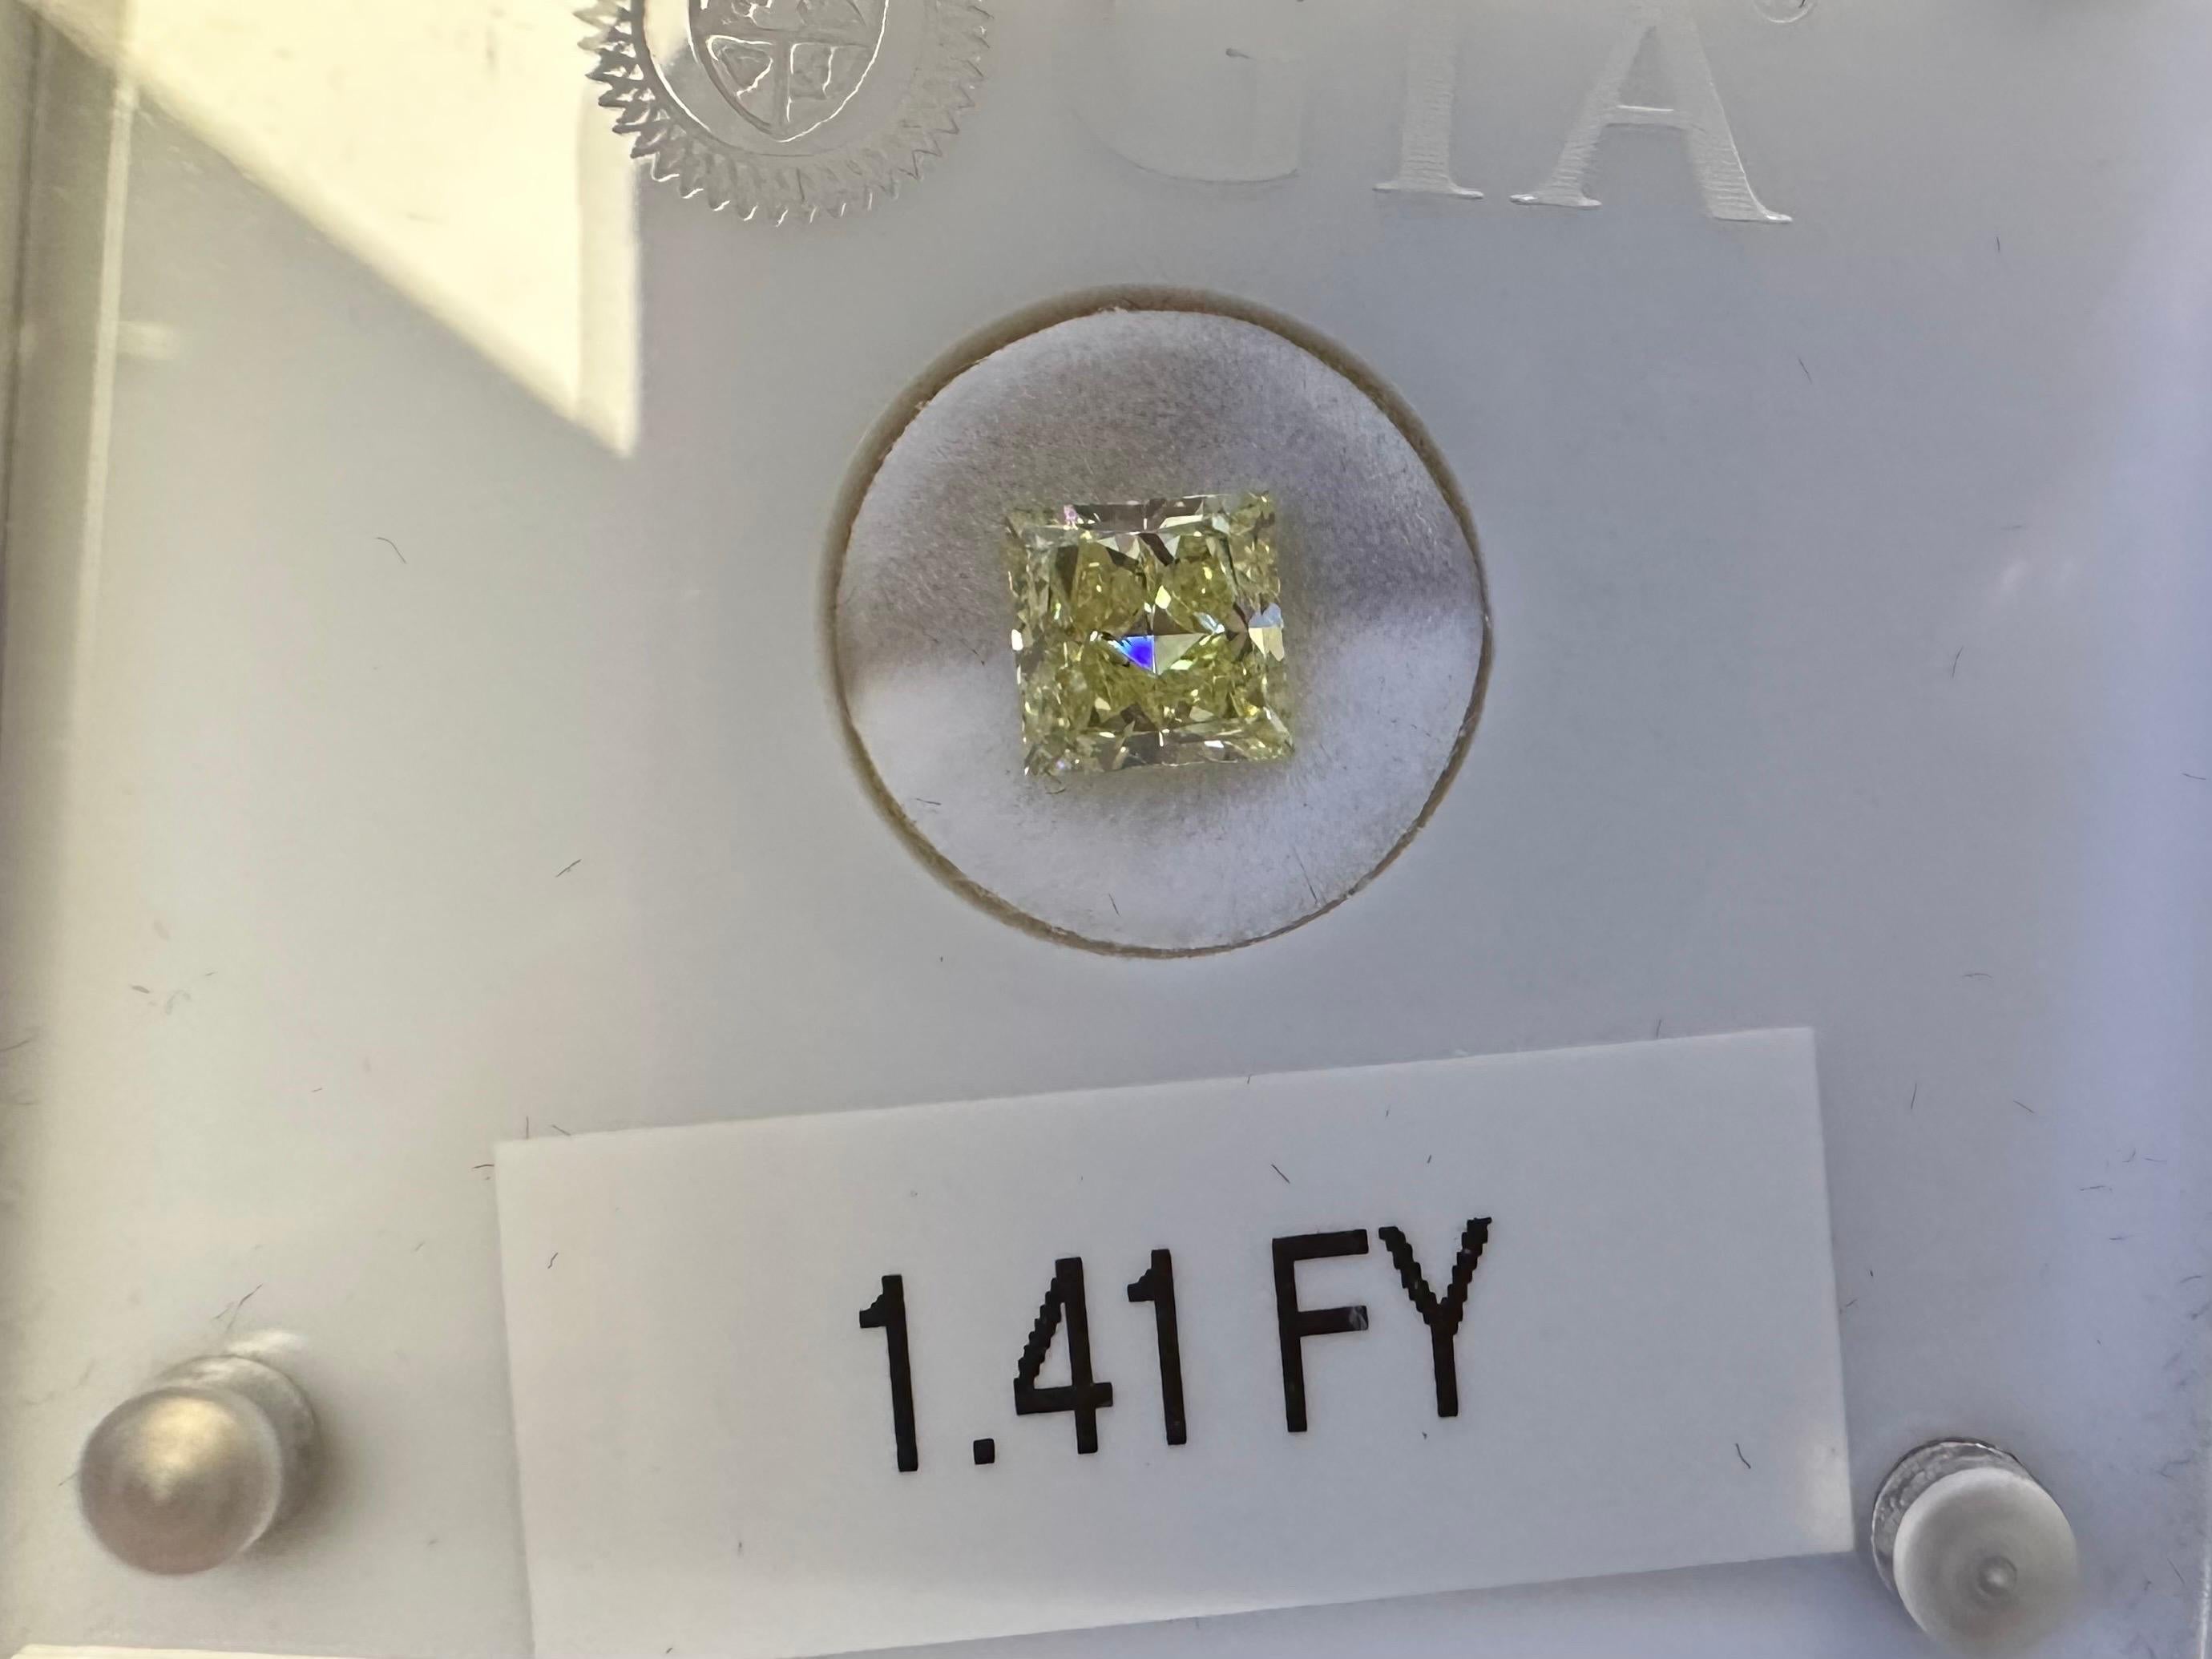 GIA certified diamond, beautiful fancy yellow, comes with box and papers!

Natural Color Diamond:
Color: Fancy Yellow
Cut: Square Brilliant
Carat: 1.41ct

Certificate of authenticity comes with purchase

ABOUT US
We are a family-owned business. Our